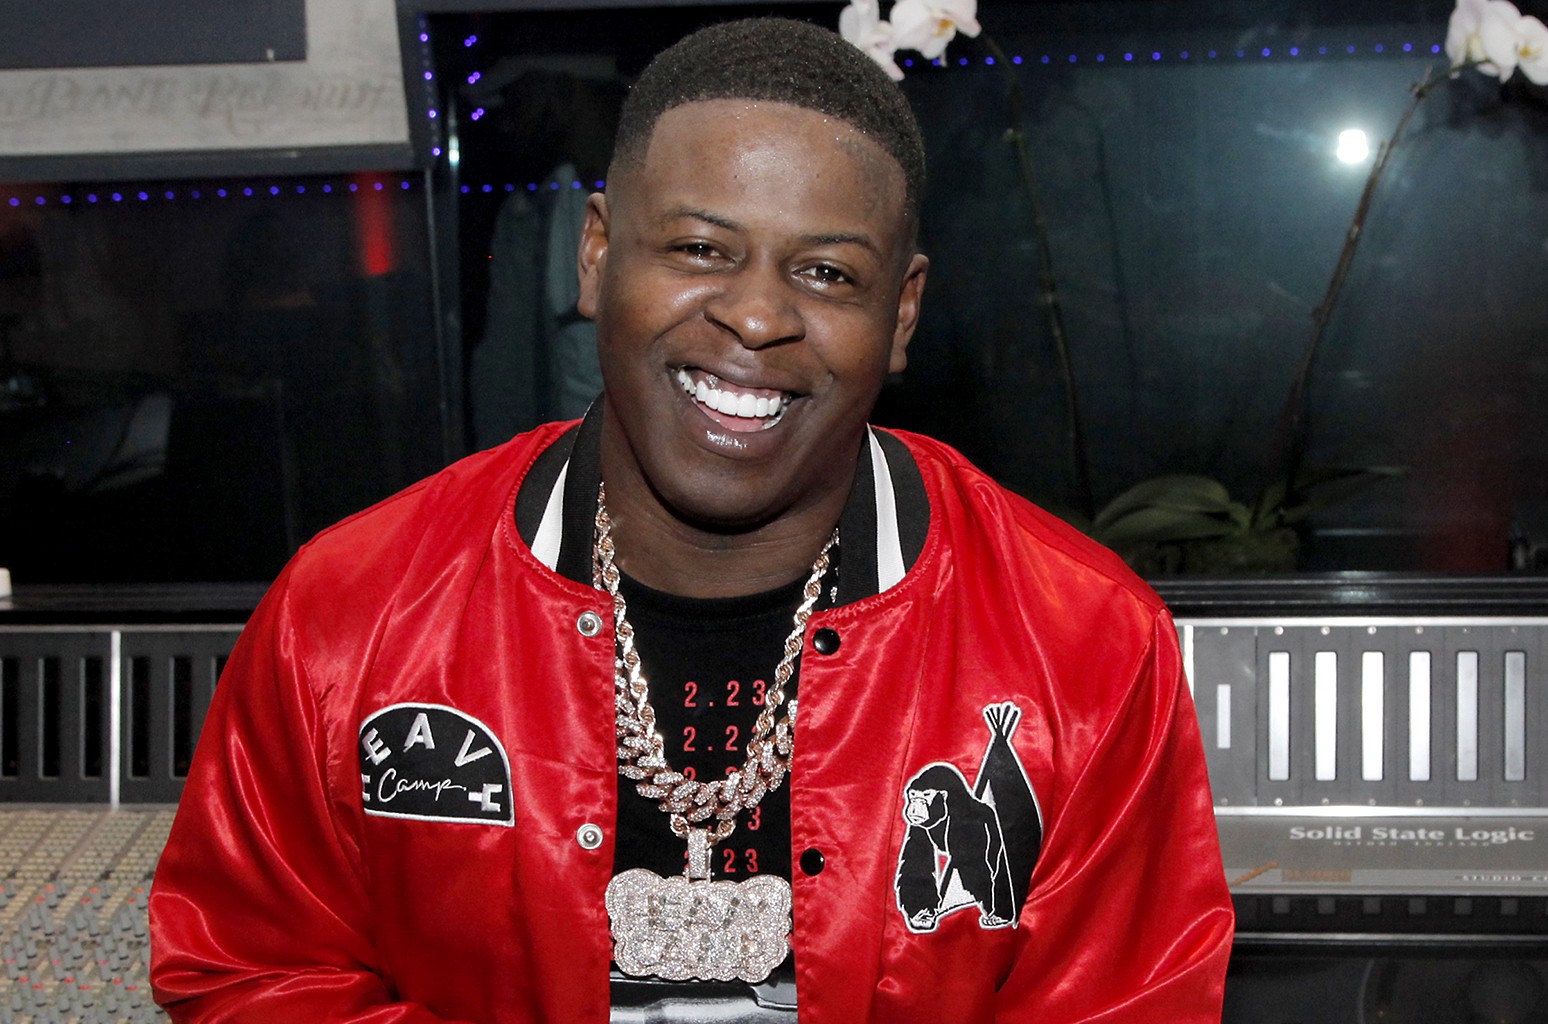 Rough Life Of A Controversial Rapper: What Is Blac Youngsta Net Worth?